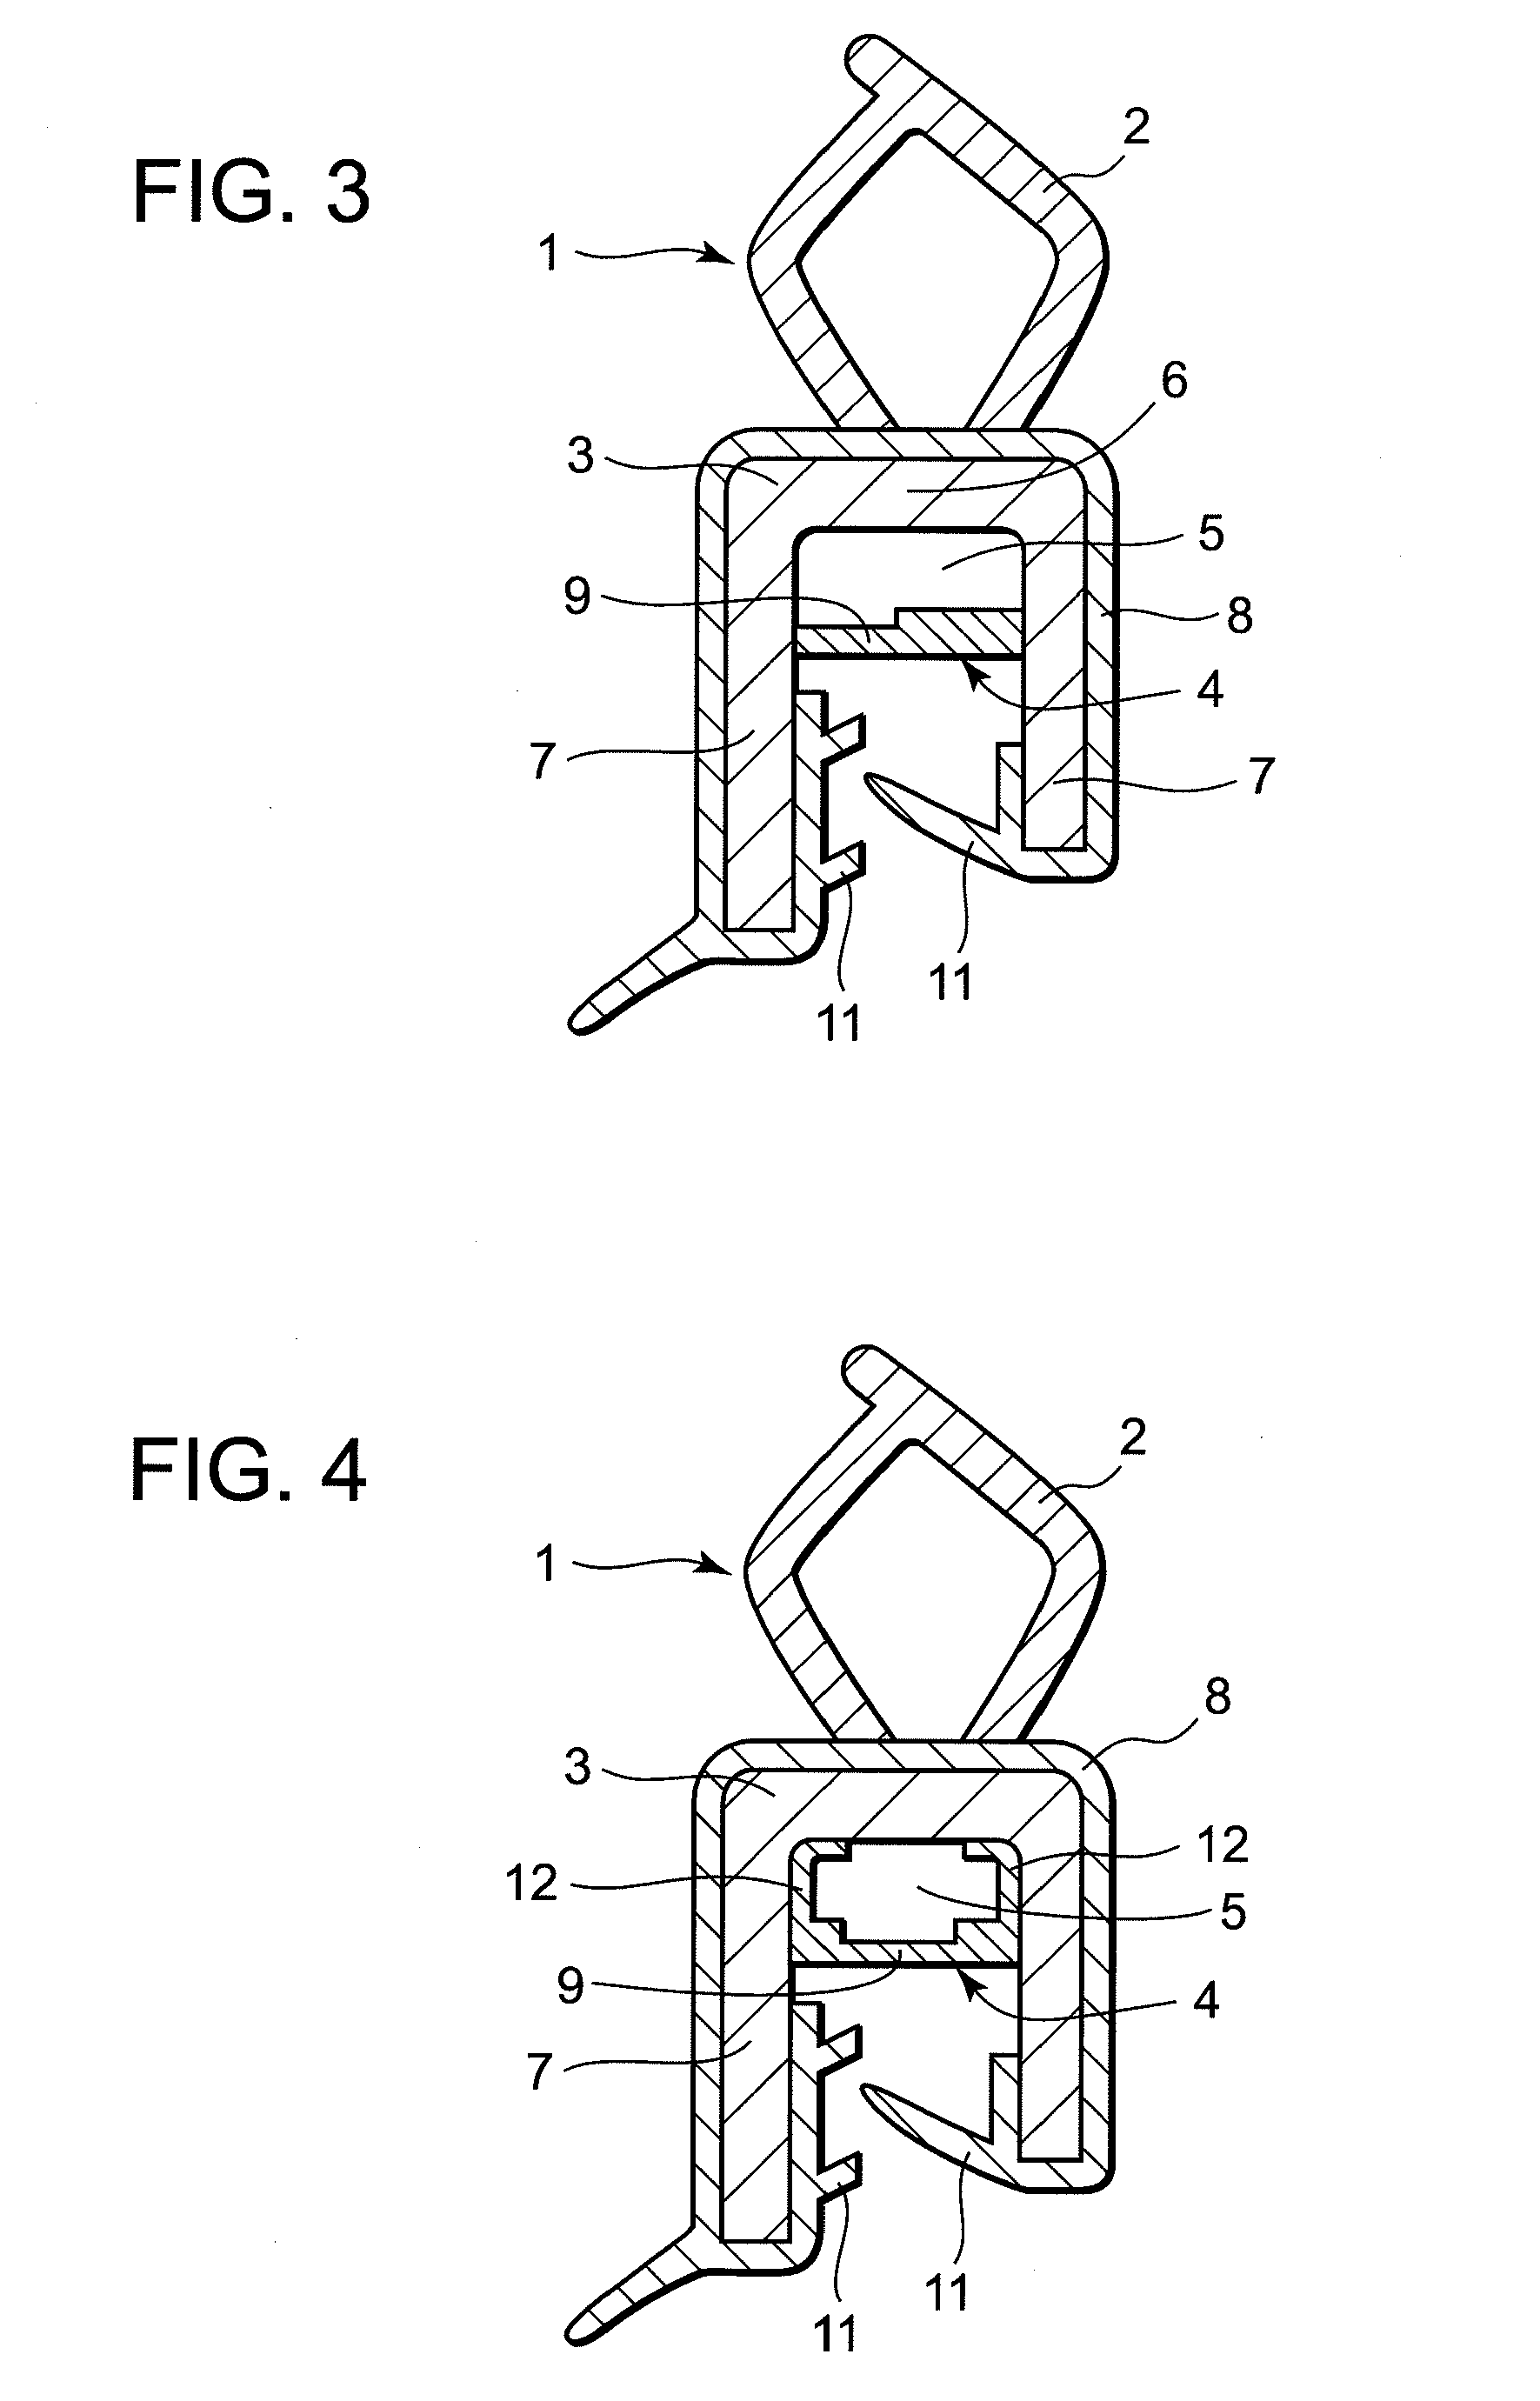 Extrusion molded product having a core material